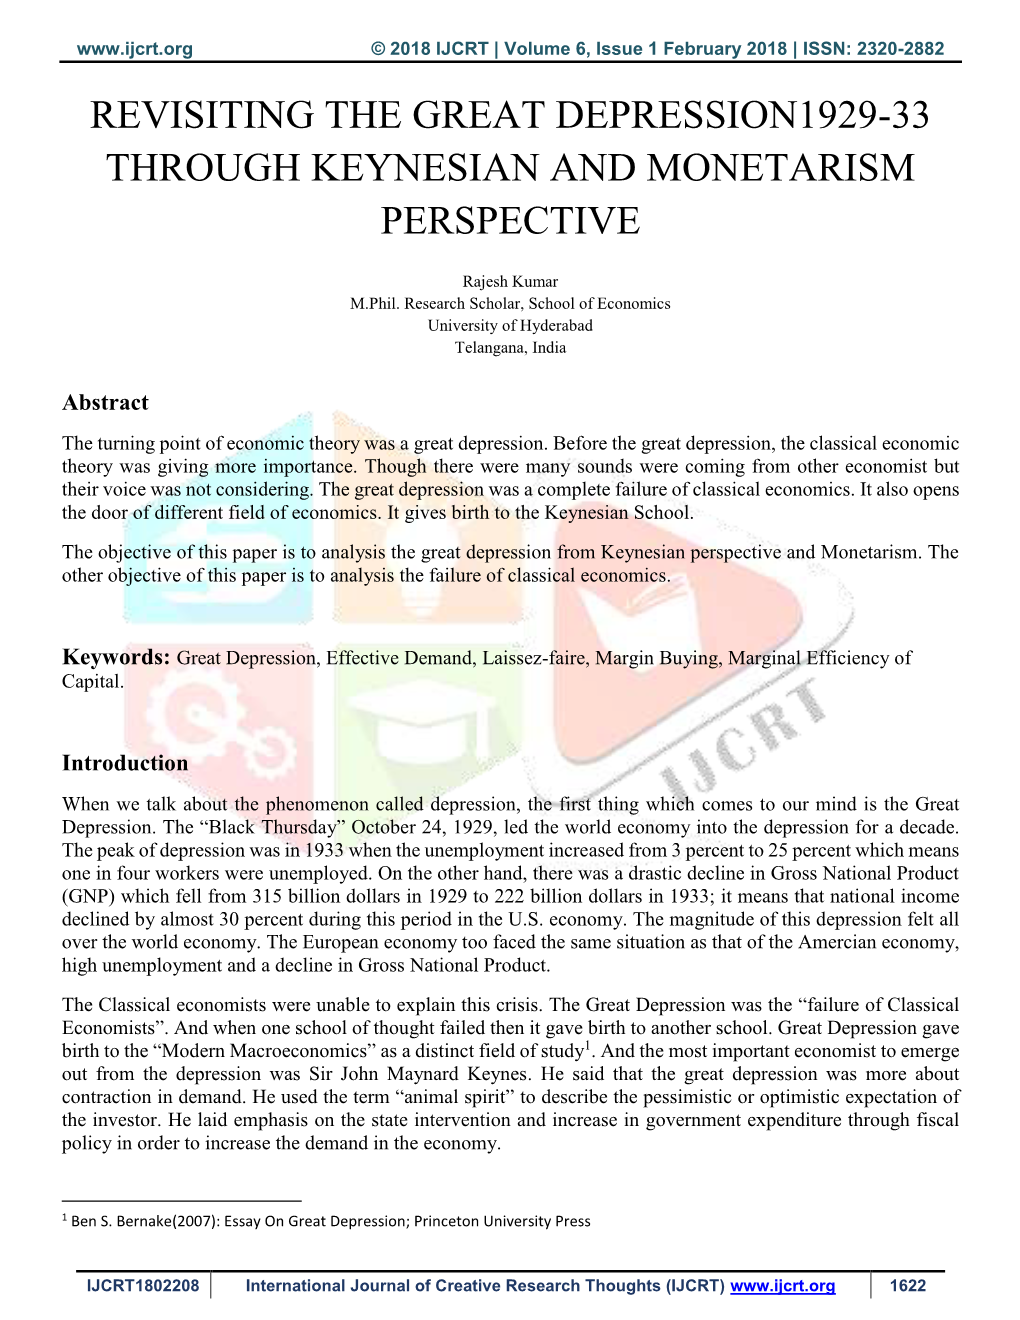 Revisiting the Great Depression1929-33 Through Keynesian and Monetarism Perspective